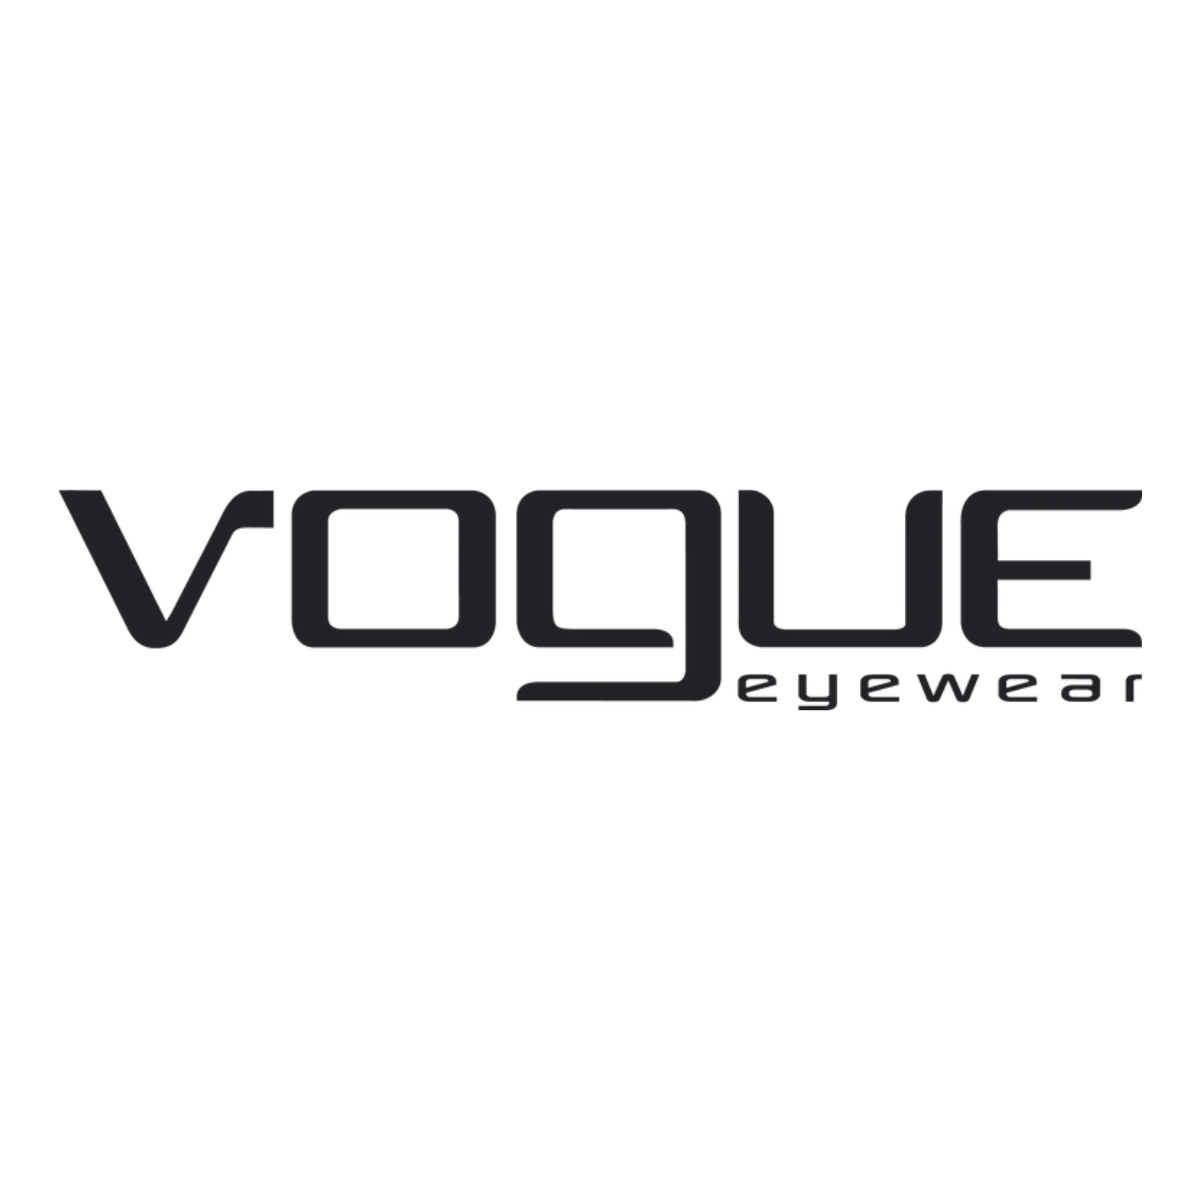 "Vogue eyewear collection: Elevate your style with complimentary shipping. Shop now!"